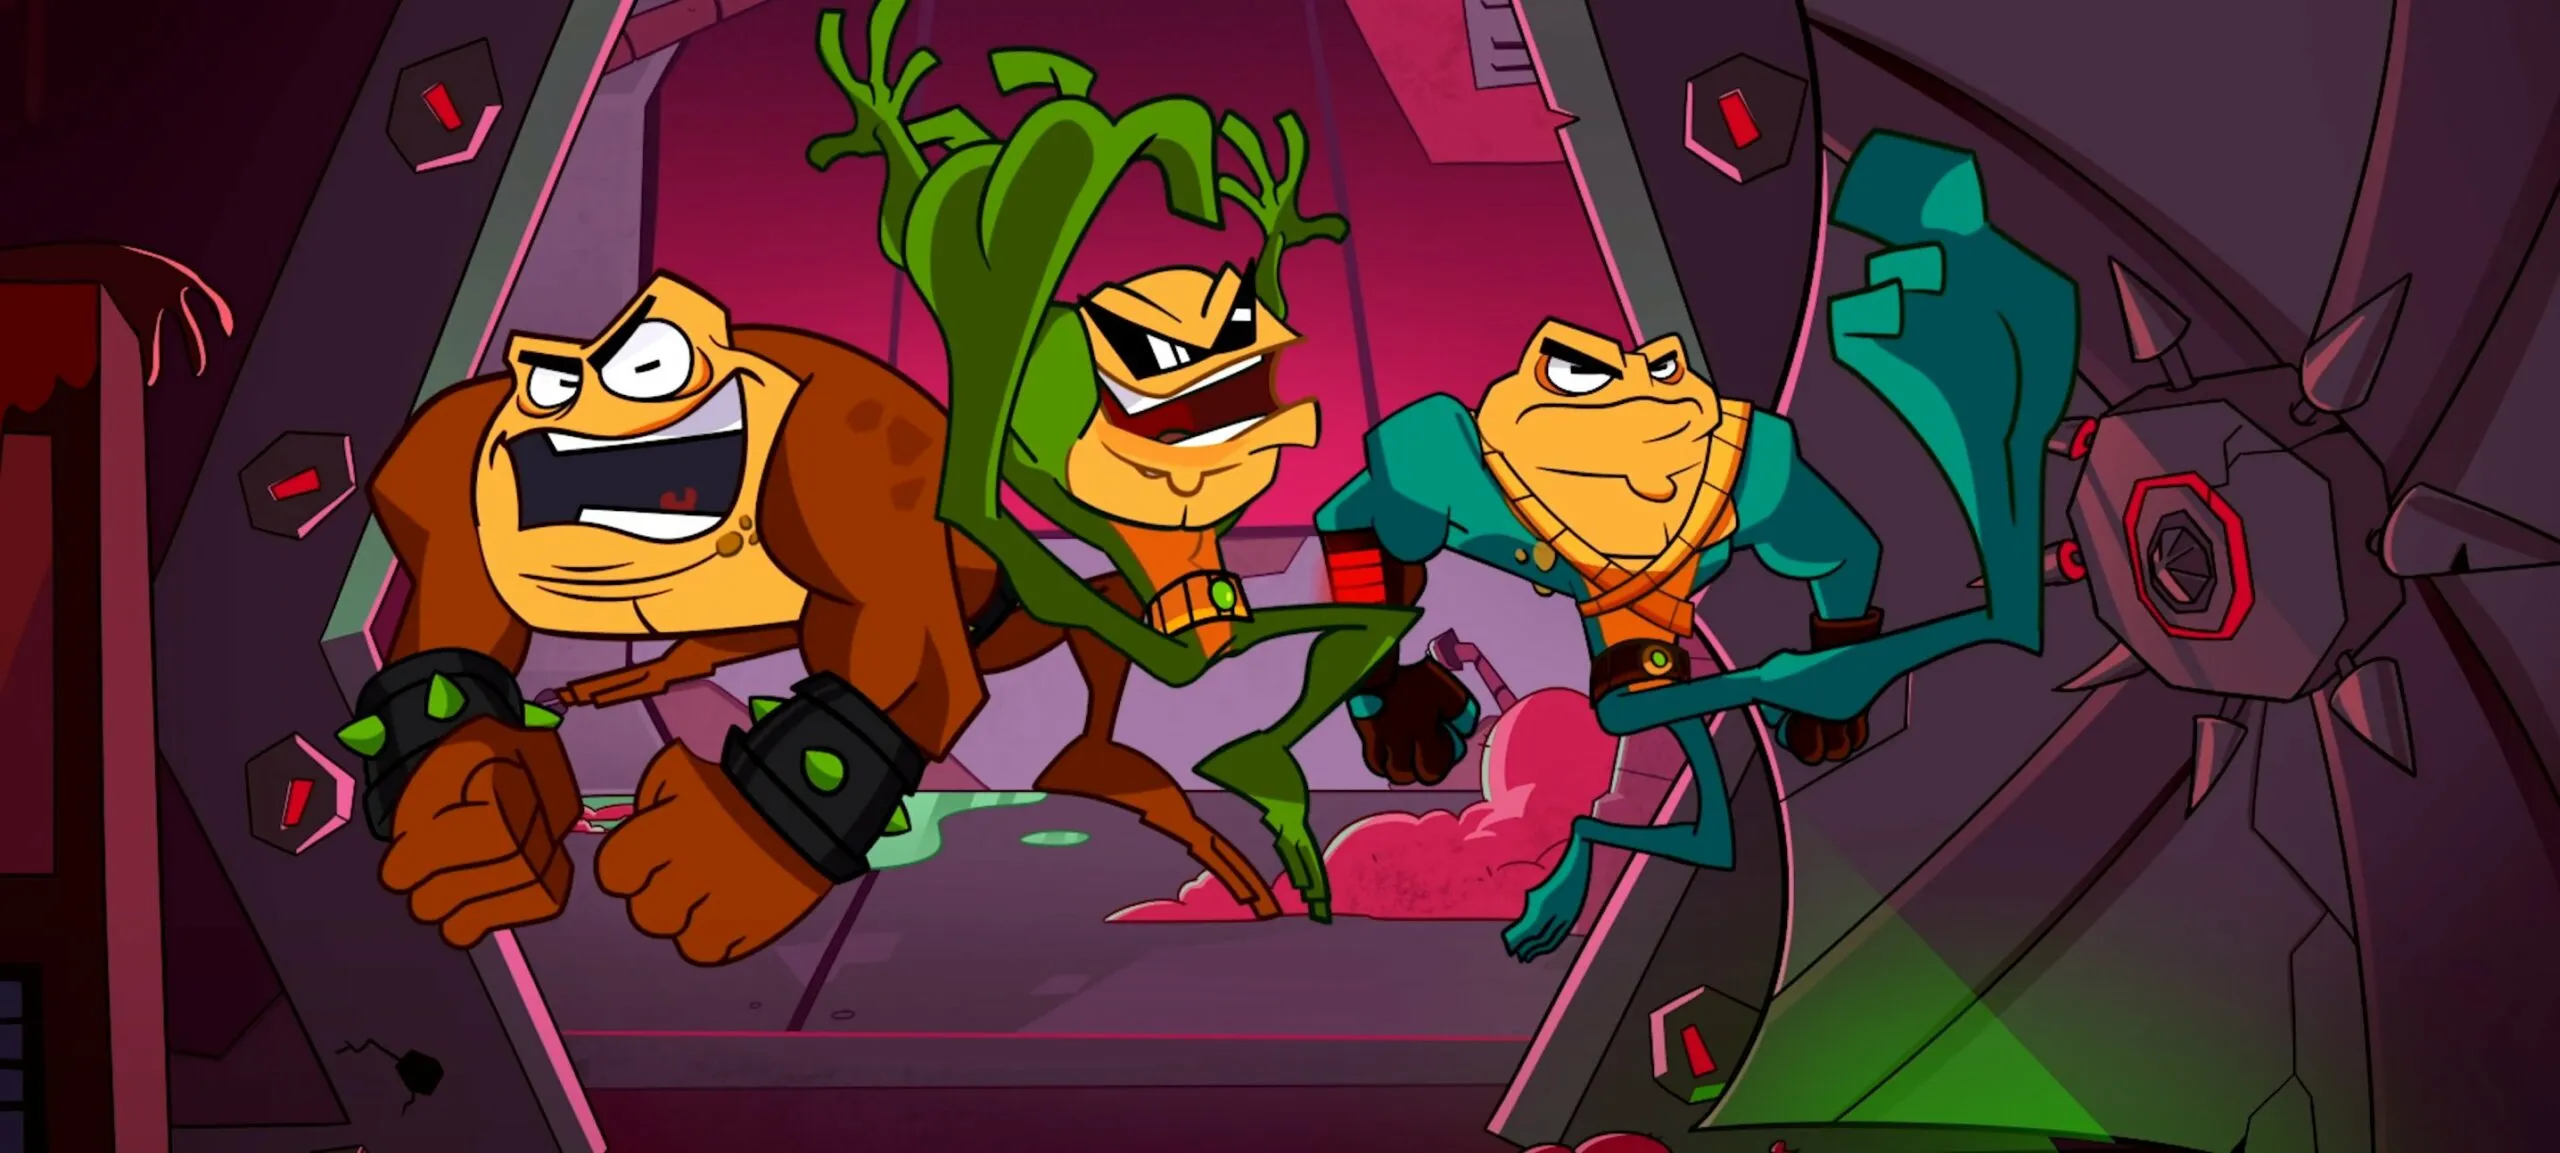 Rumor: A New Battletoads Game May Have Been Hinted At